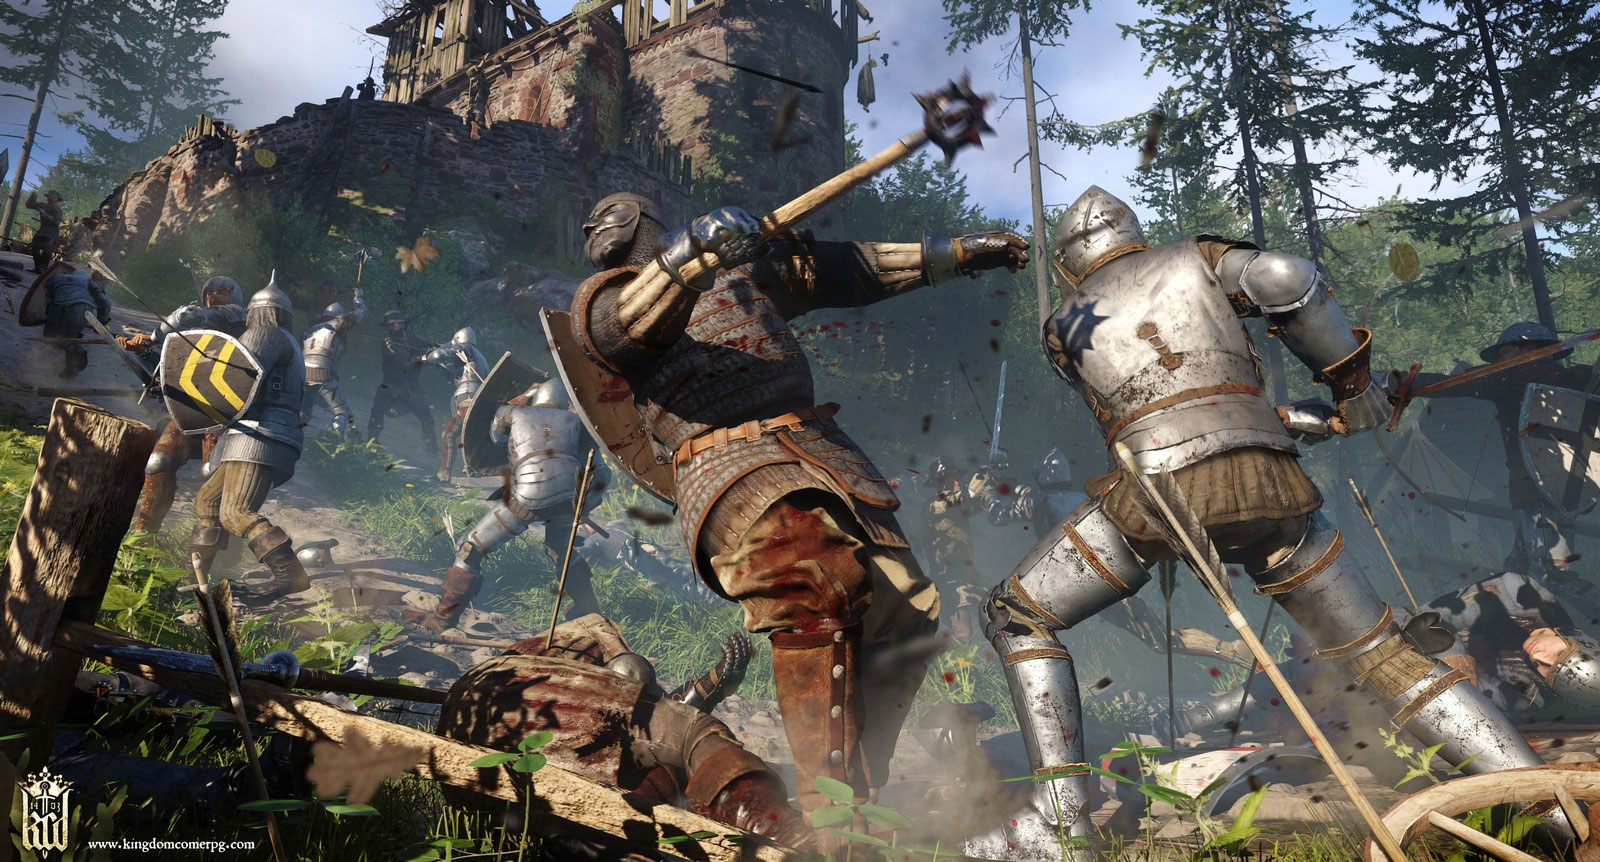  Six years after Kingdom Come Deliverance, Warhorse Studios is announcing its new game next week 